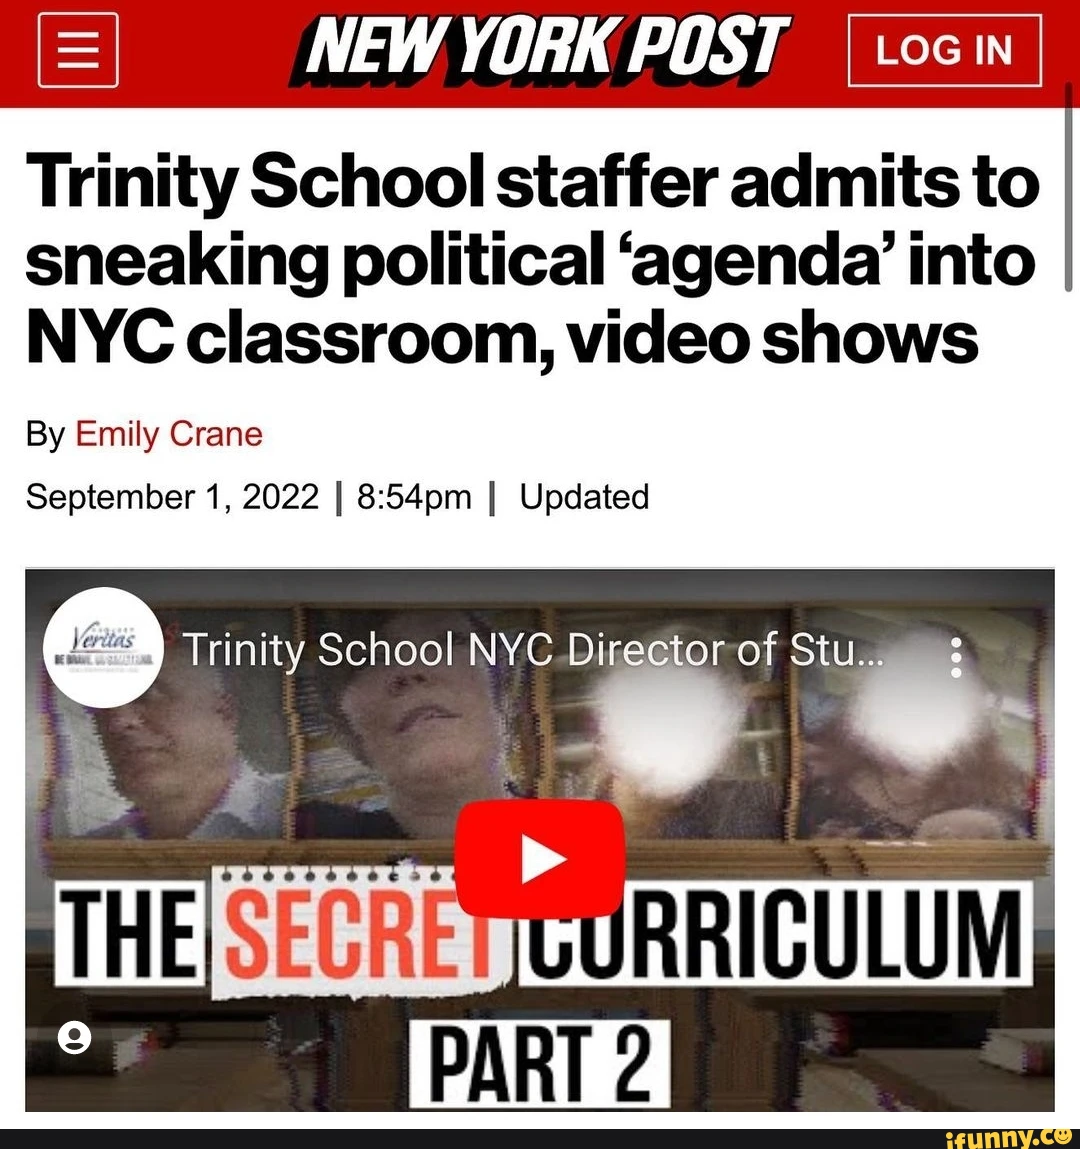 NEW YORK POST Trinity School staffer admits to sneaking political 'agenda' into NYC classroom, video shows By Emily Crane September 1, 2022 II I Updated Trinity School NYC Director of Stu. PART 2